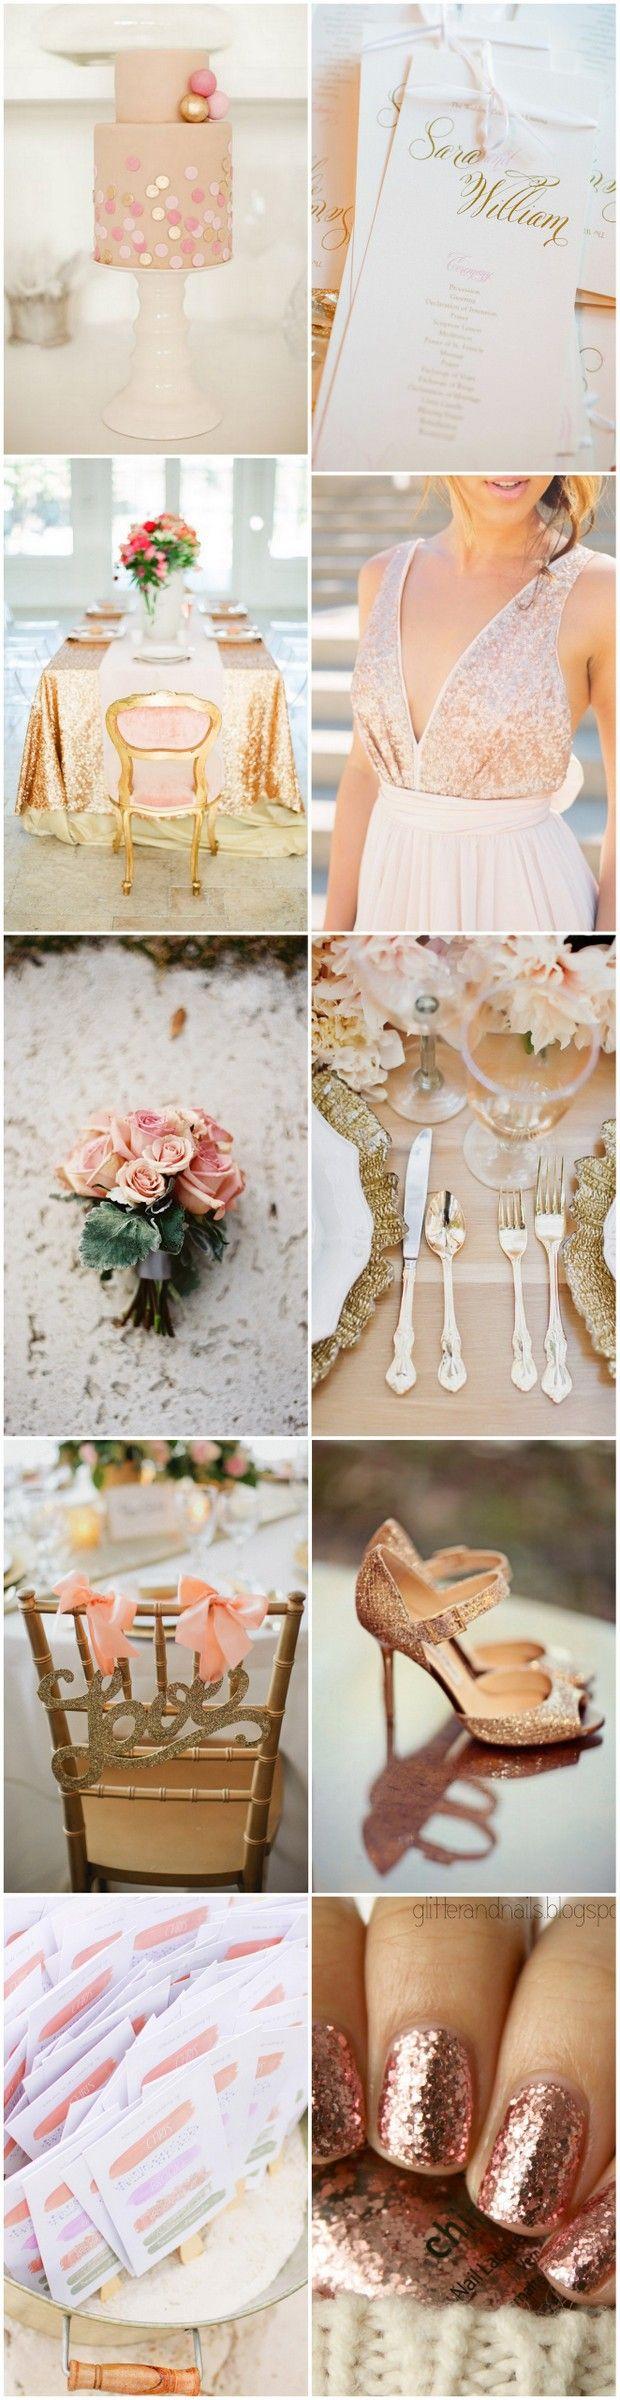 Wedding - Is There A Theme Or Color?